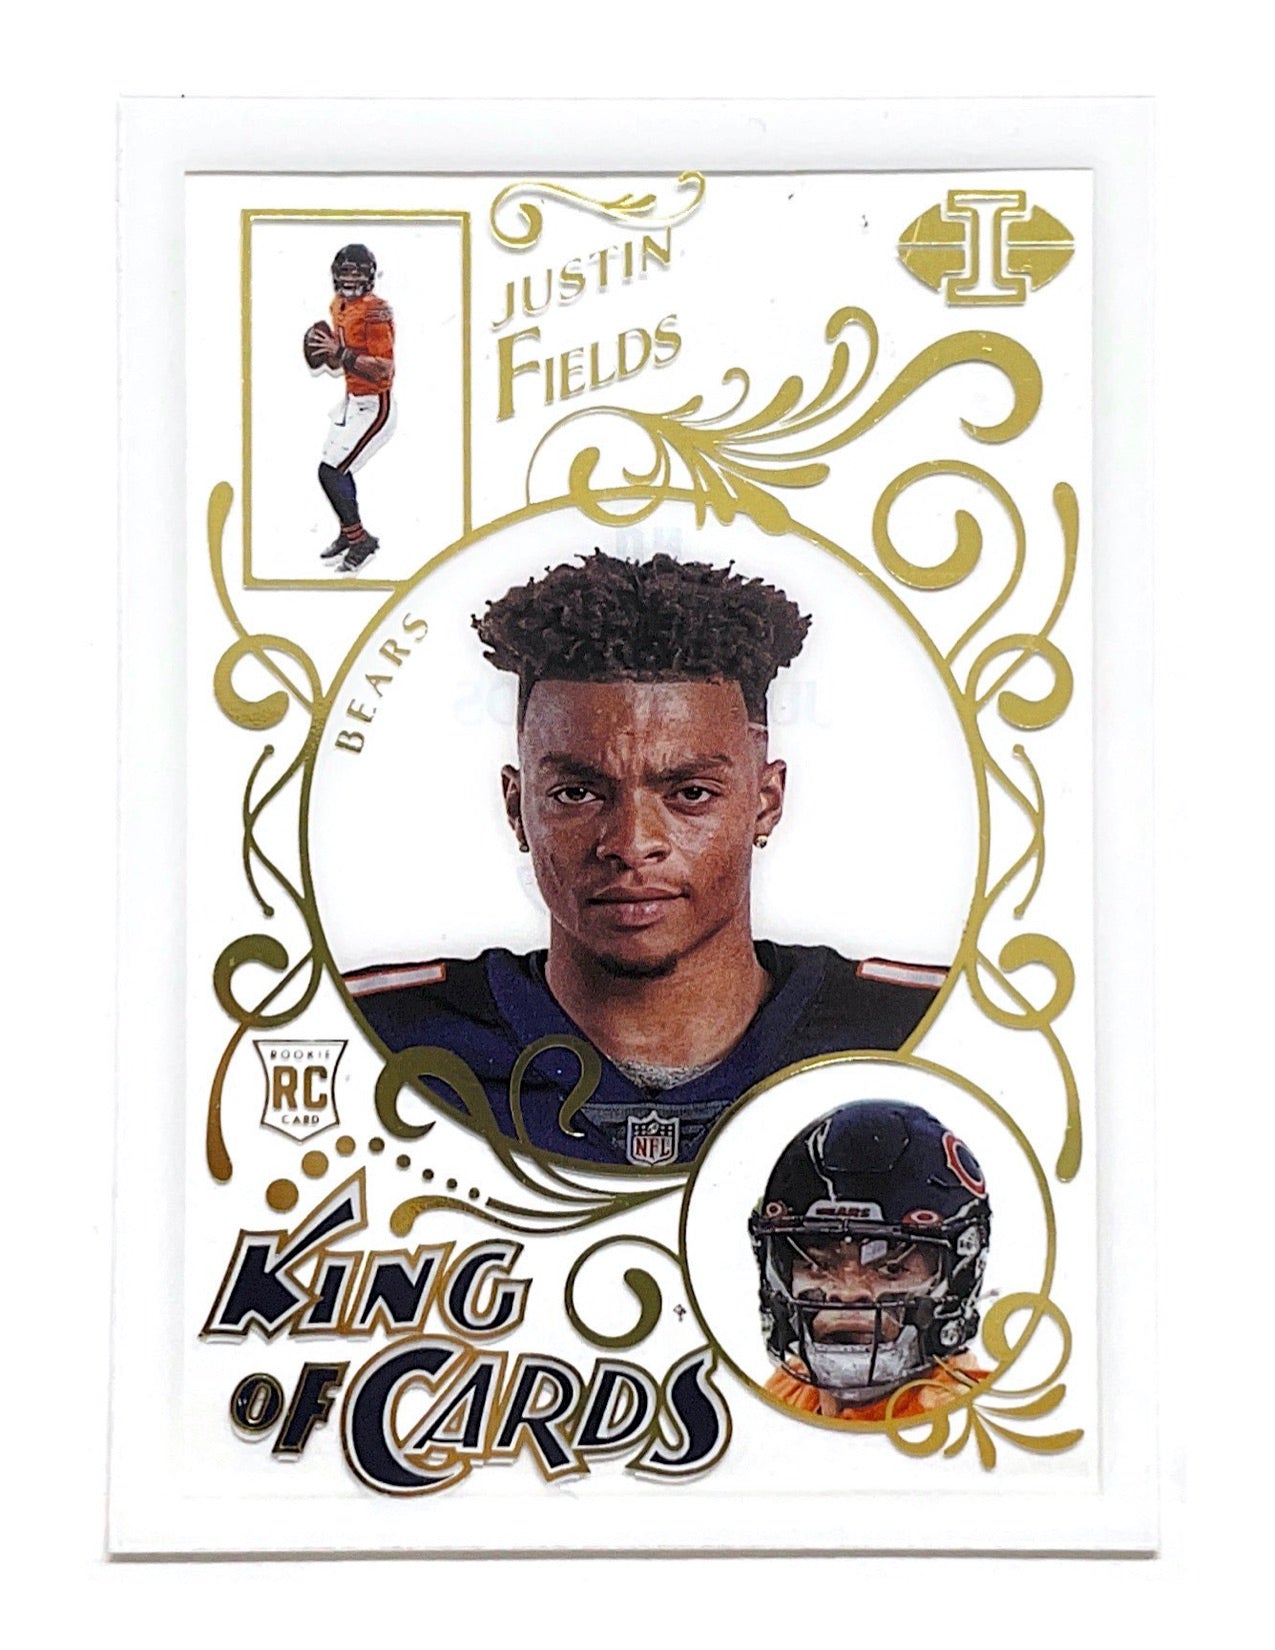 Justin Fields 2021 Panini Illusions King Of Cards Rookie #KC-14